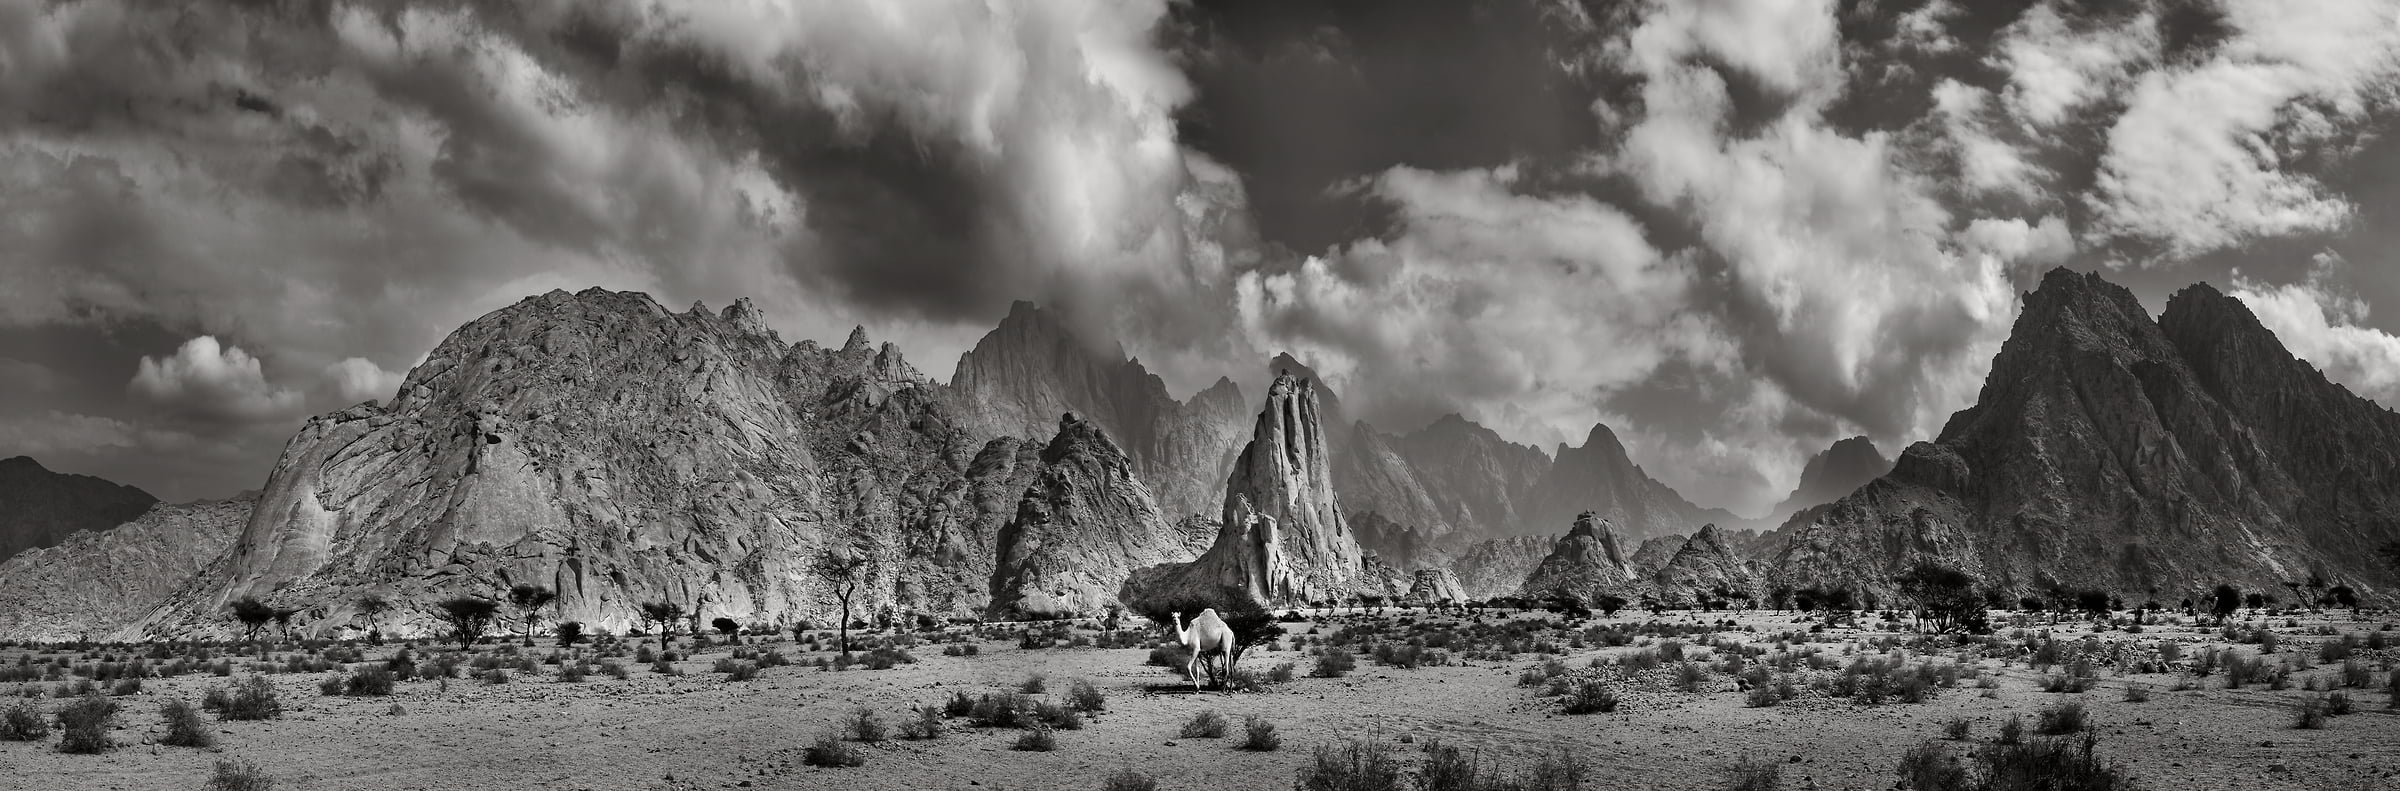 216 megapixels! A very high resolution, large-format black & white photo print of a desert landscape with a camel and mountains; photograph created by Peter Rodger in Tabuk, Saudi Arabia.